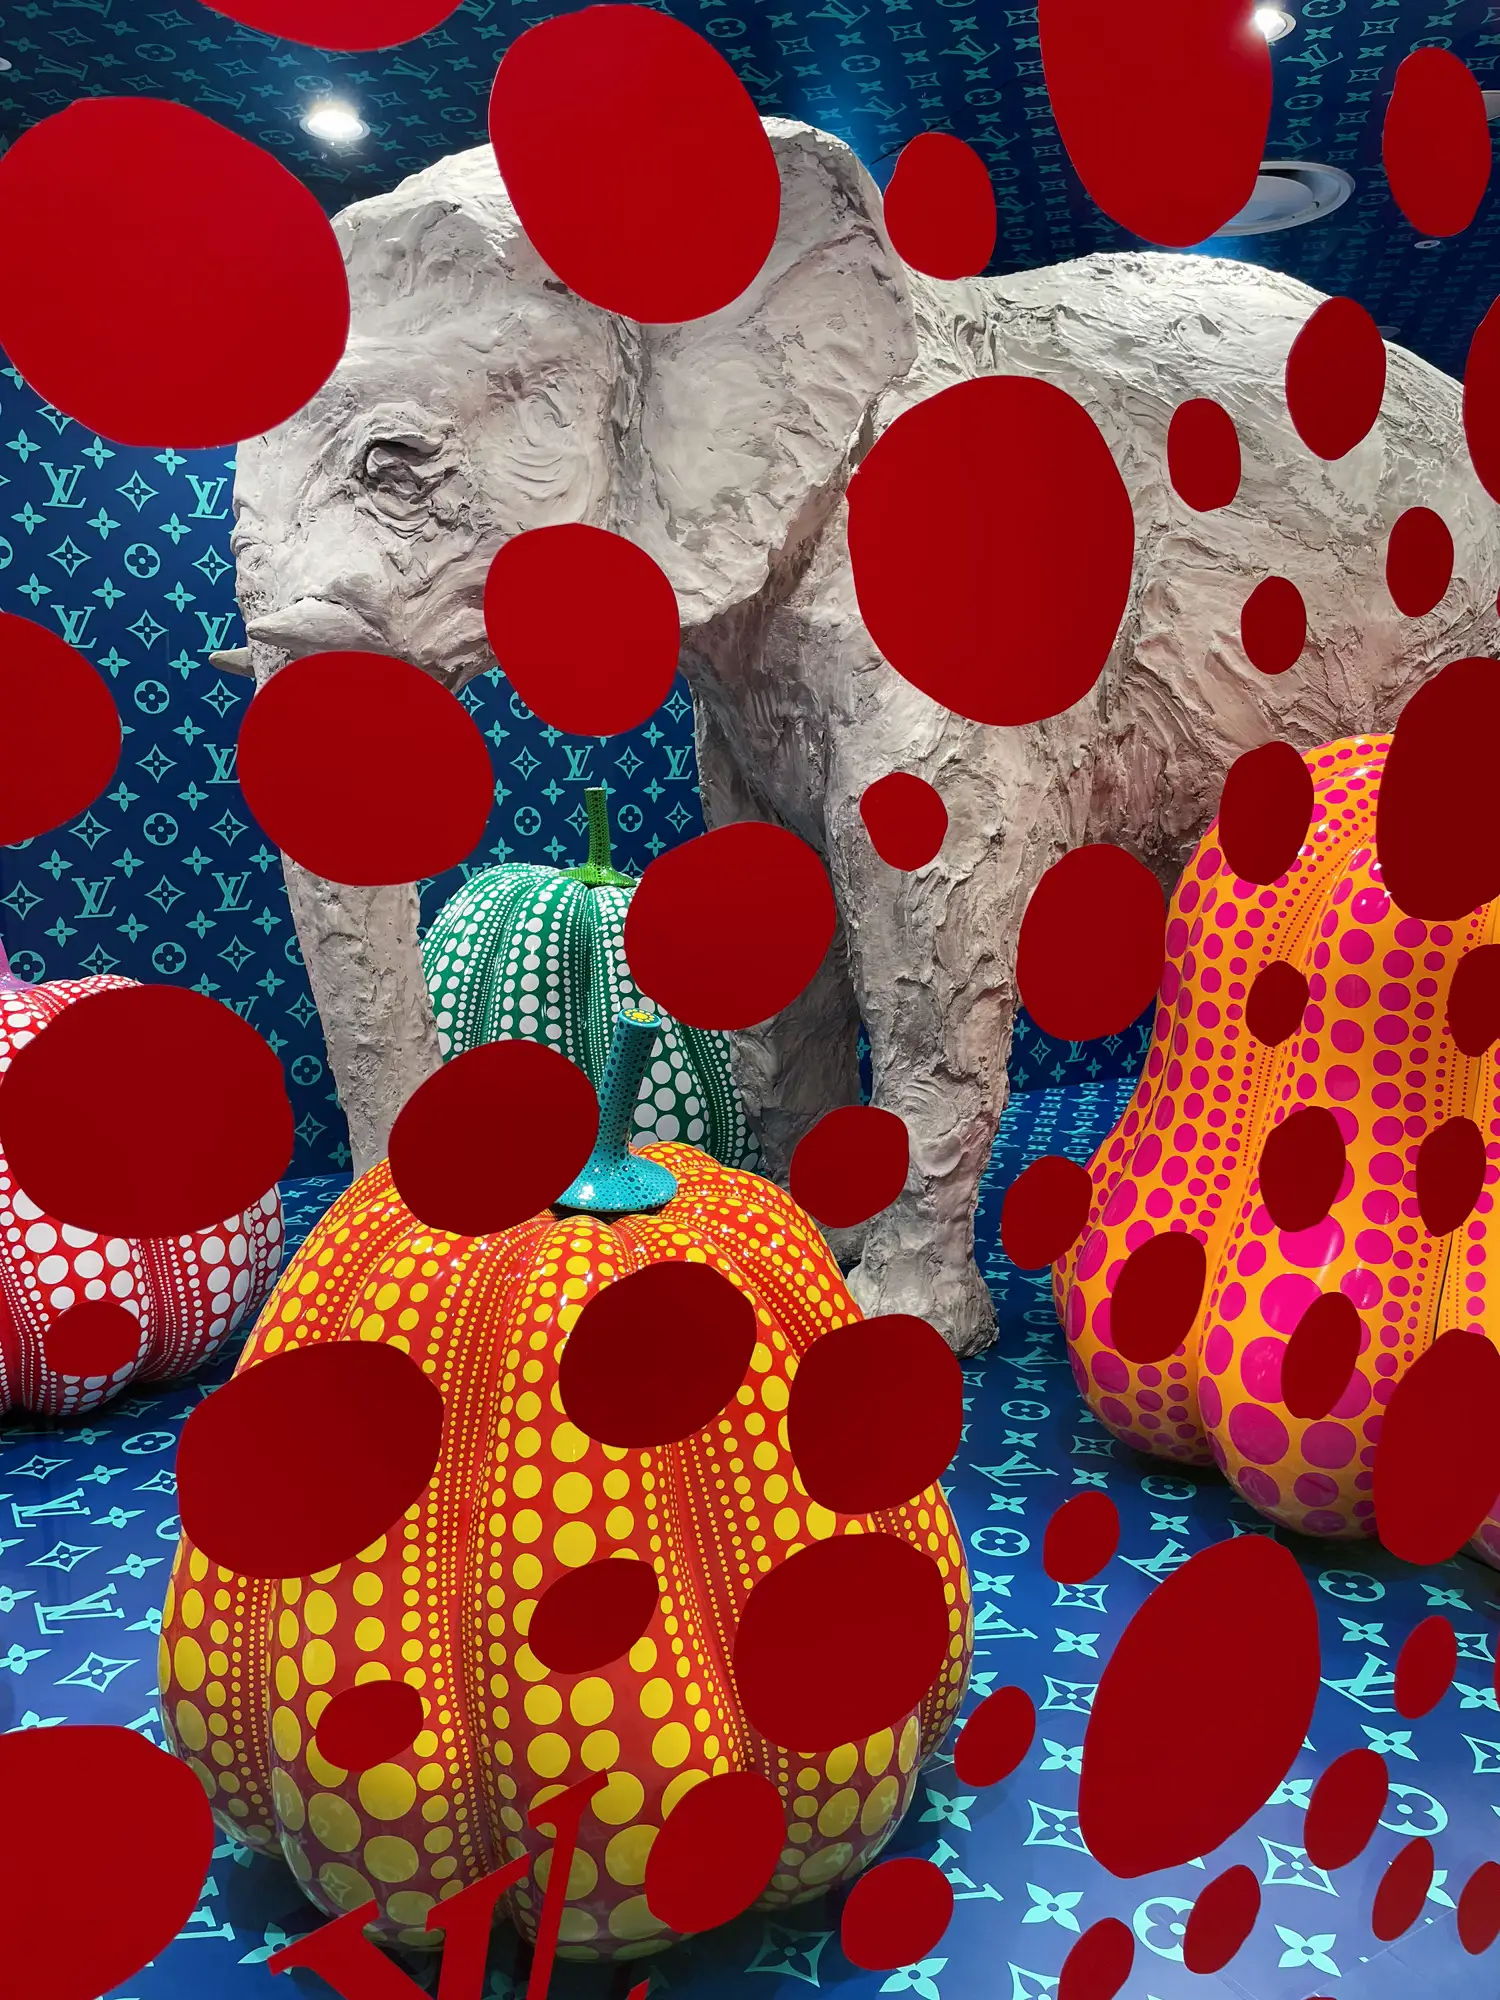 🗽 Louis Vuitton unveiled another Yayoi Kusama art mural at their flagship  store to welcome spring 🌺🌿🍄 📍 Louis Vuitton 5th Avenue and 57th…